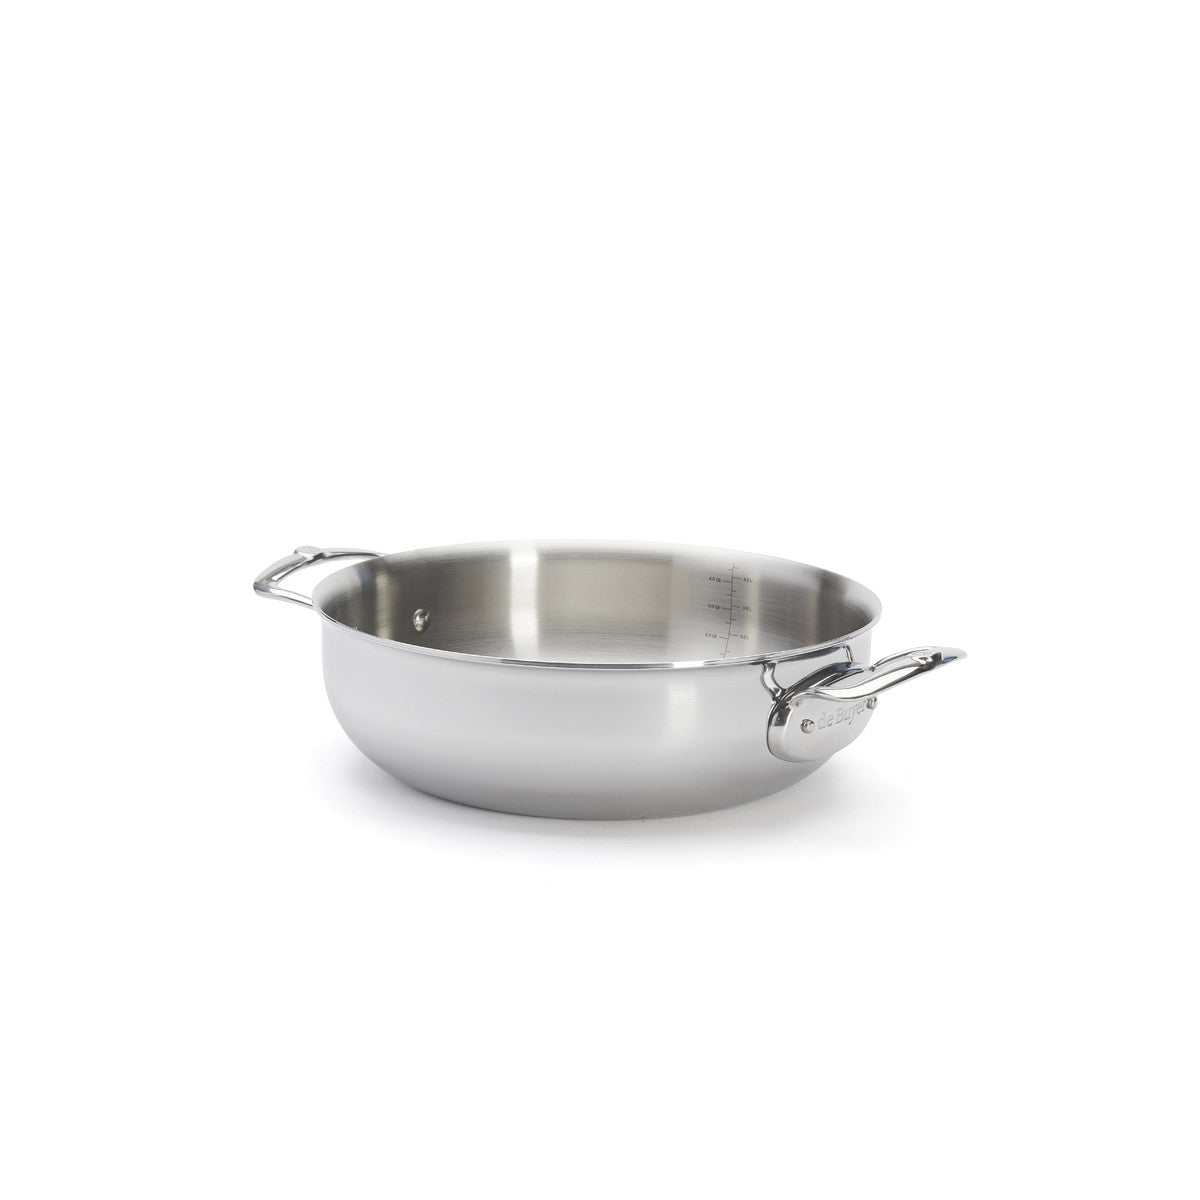 Affinity large, rounded sauteuse with two handles and lid